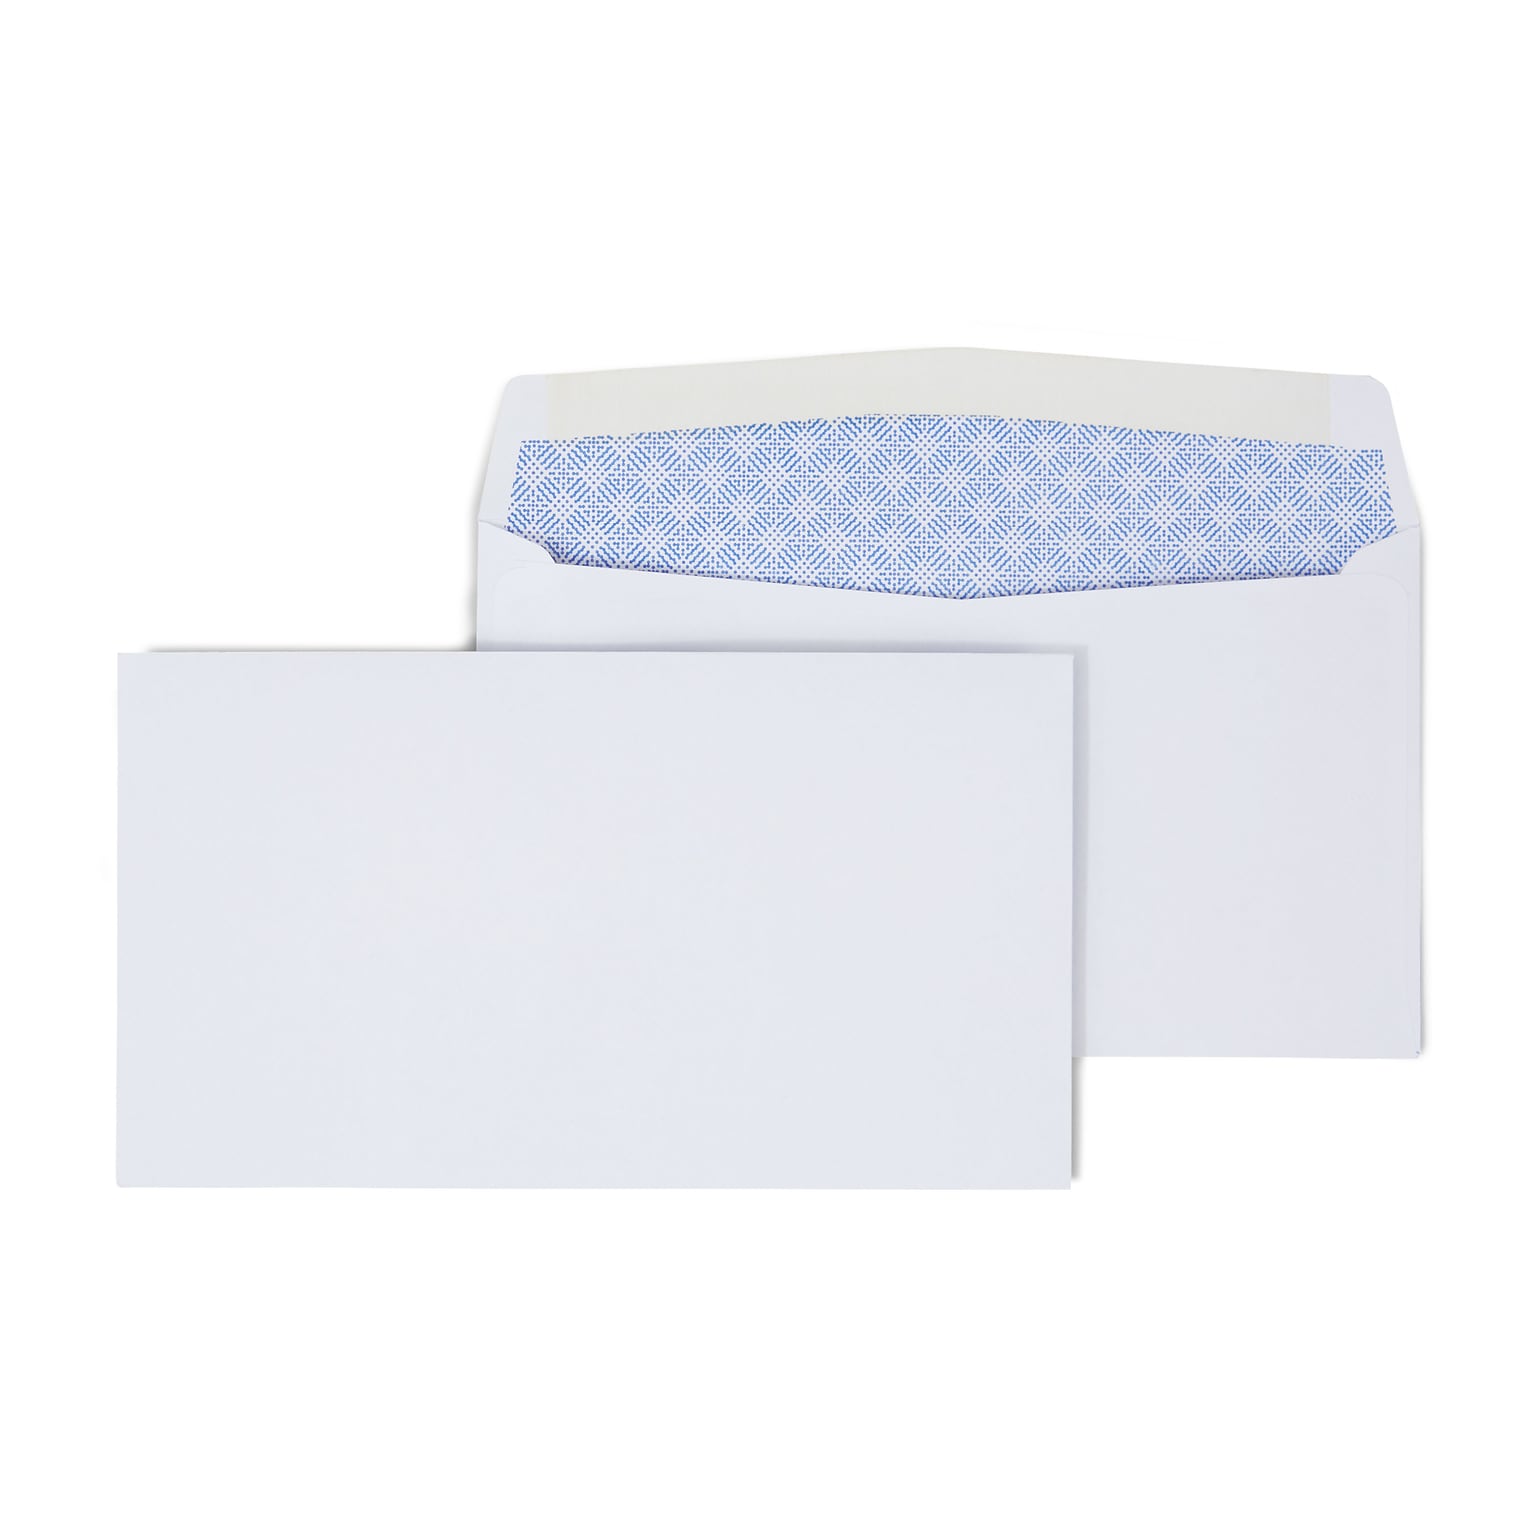 Quill Brand Gummed Security Tinted #6 3/4 Business Envelope, 3 5/8 x 6 1/2, White, 250/Box (NULL)